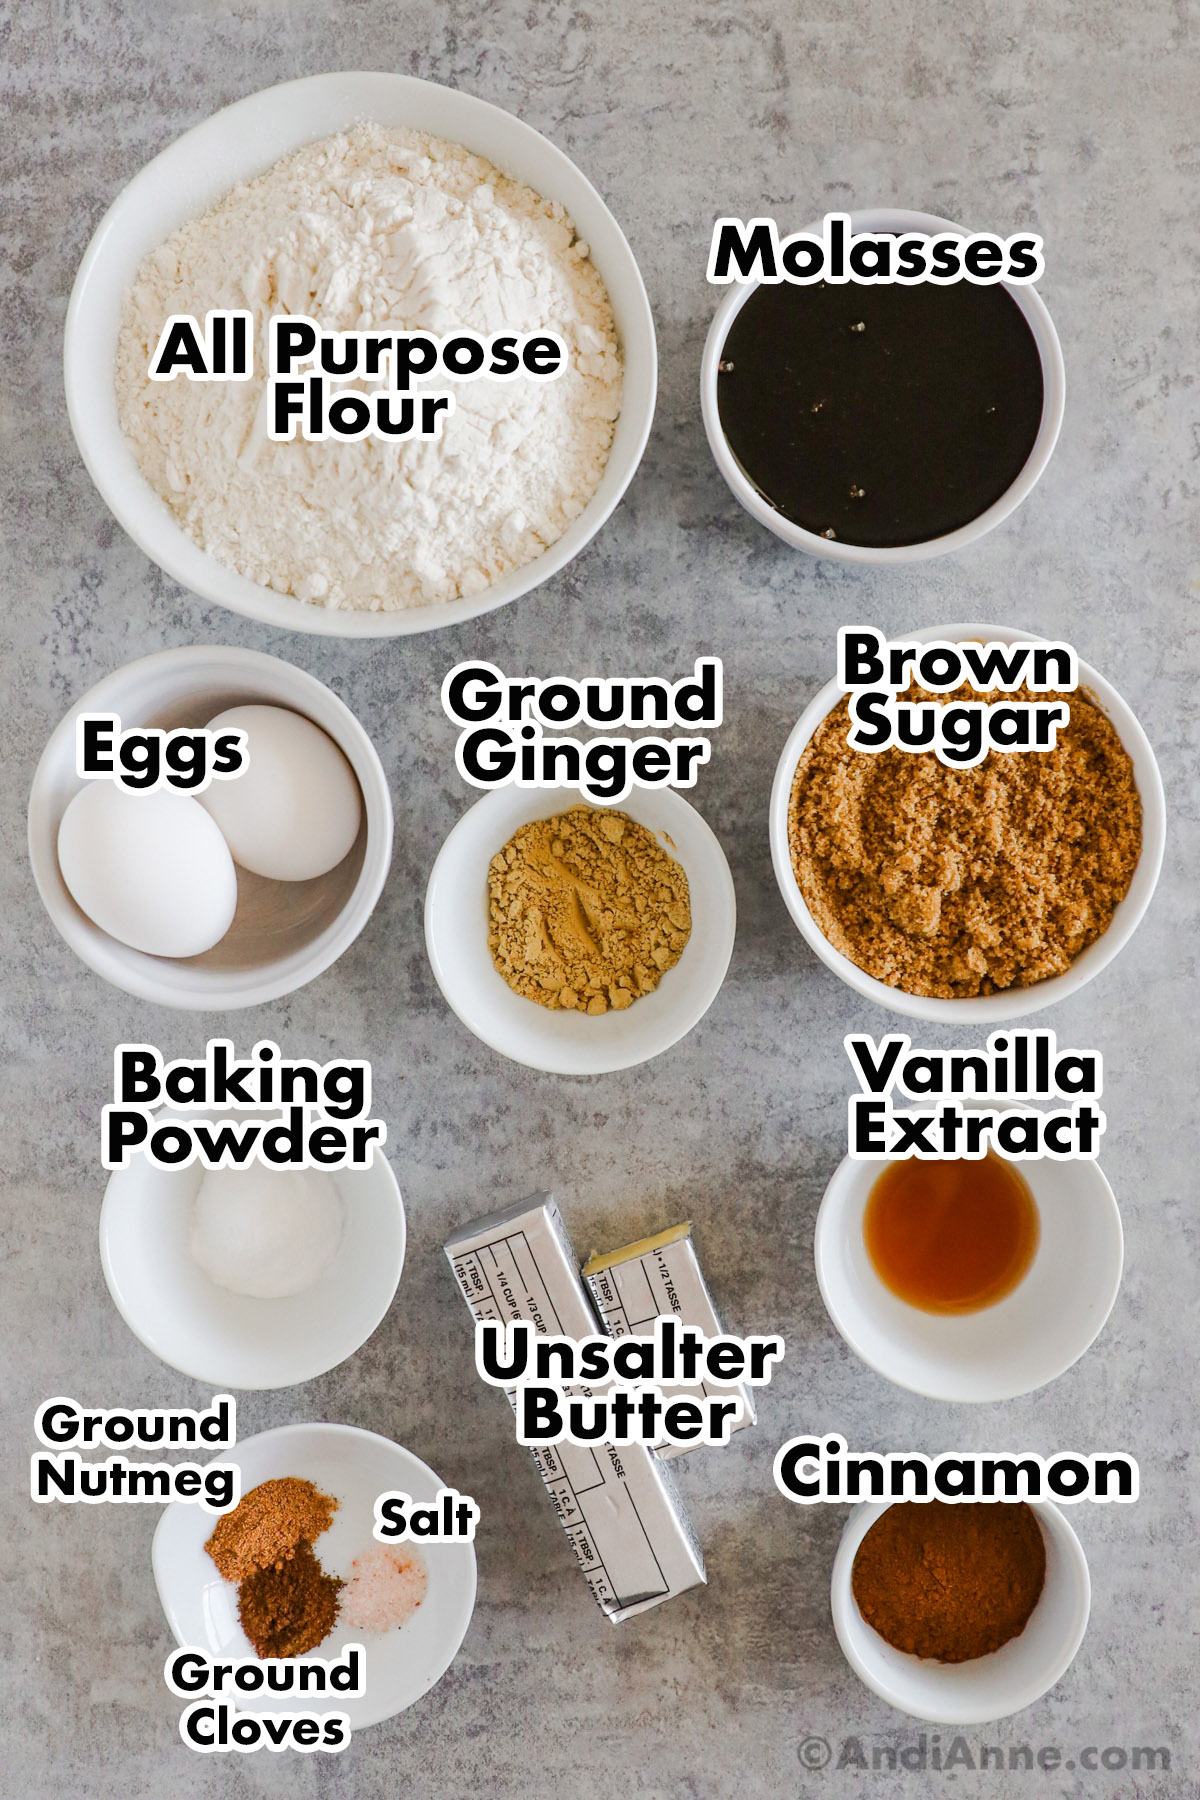 Bowls of recipe ingredients including flour, molasses, brown sugar, ground ginger, eggs, baking powder, vanilla extract, spices and butter.